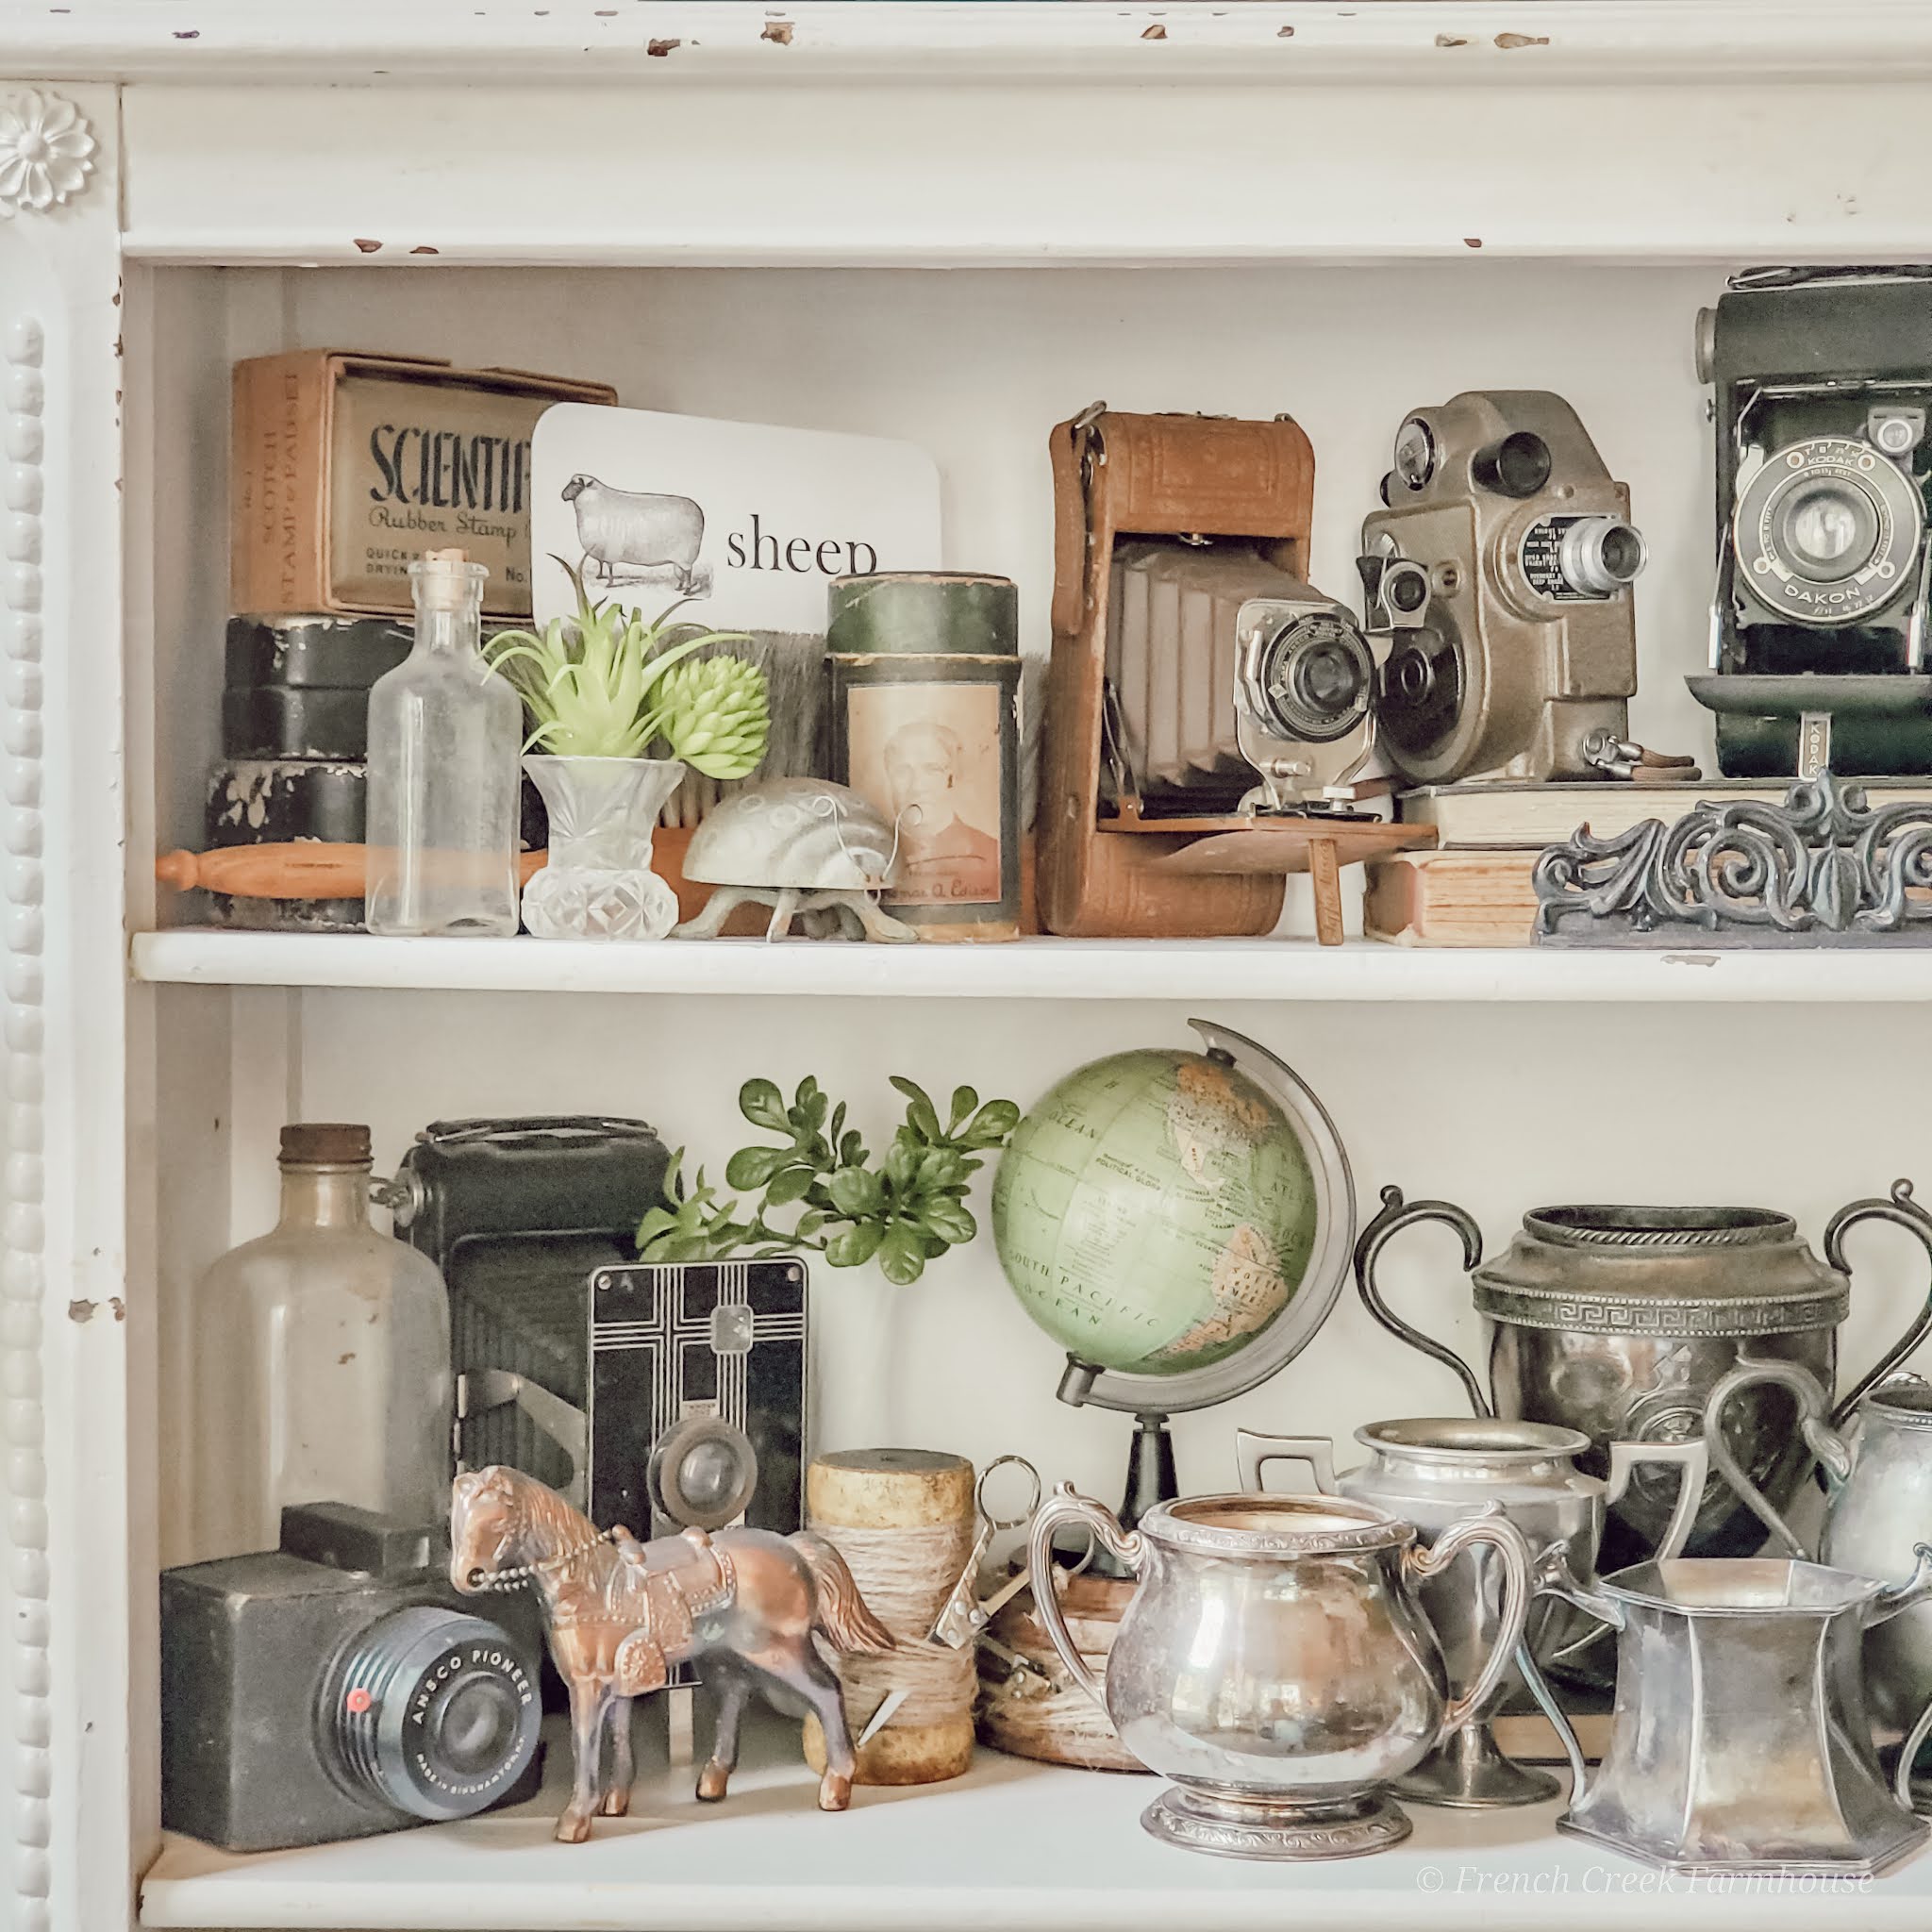 This guide will teach you everything you need to know to design your vintage home